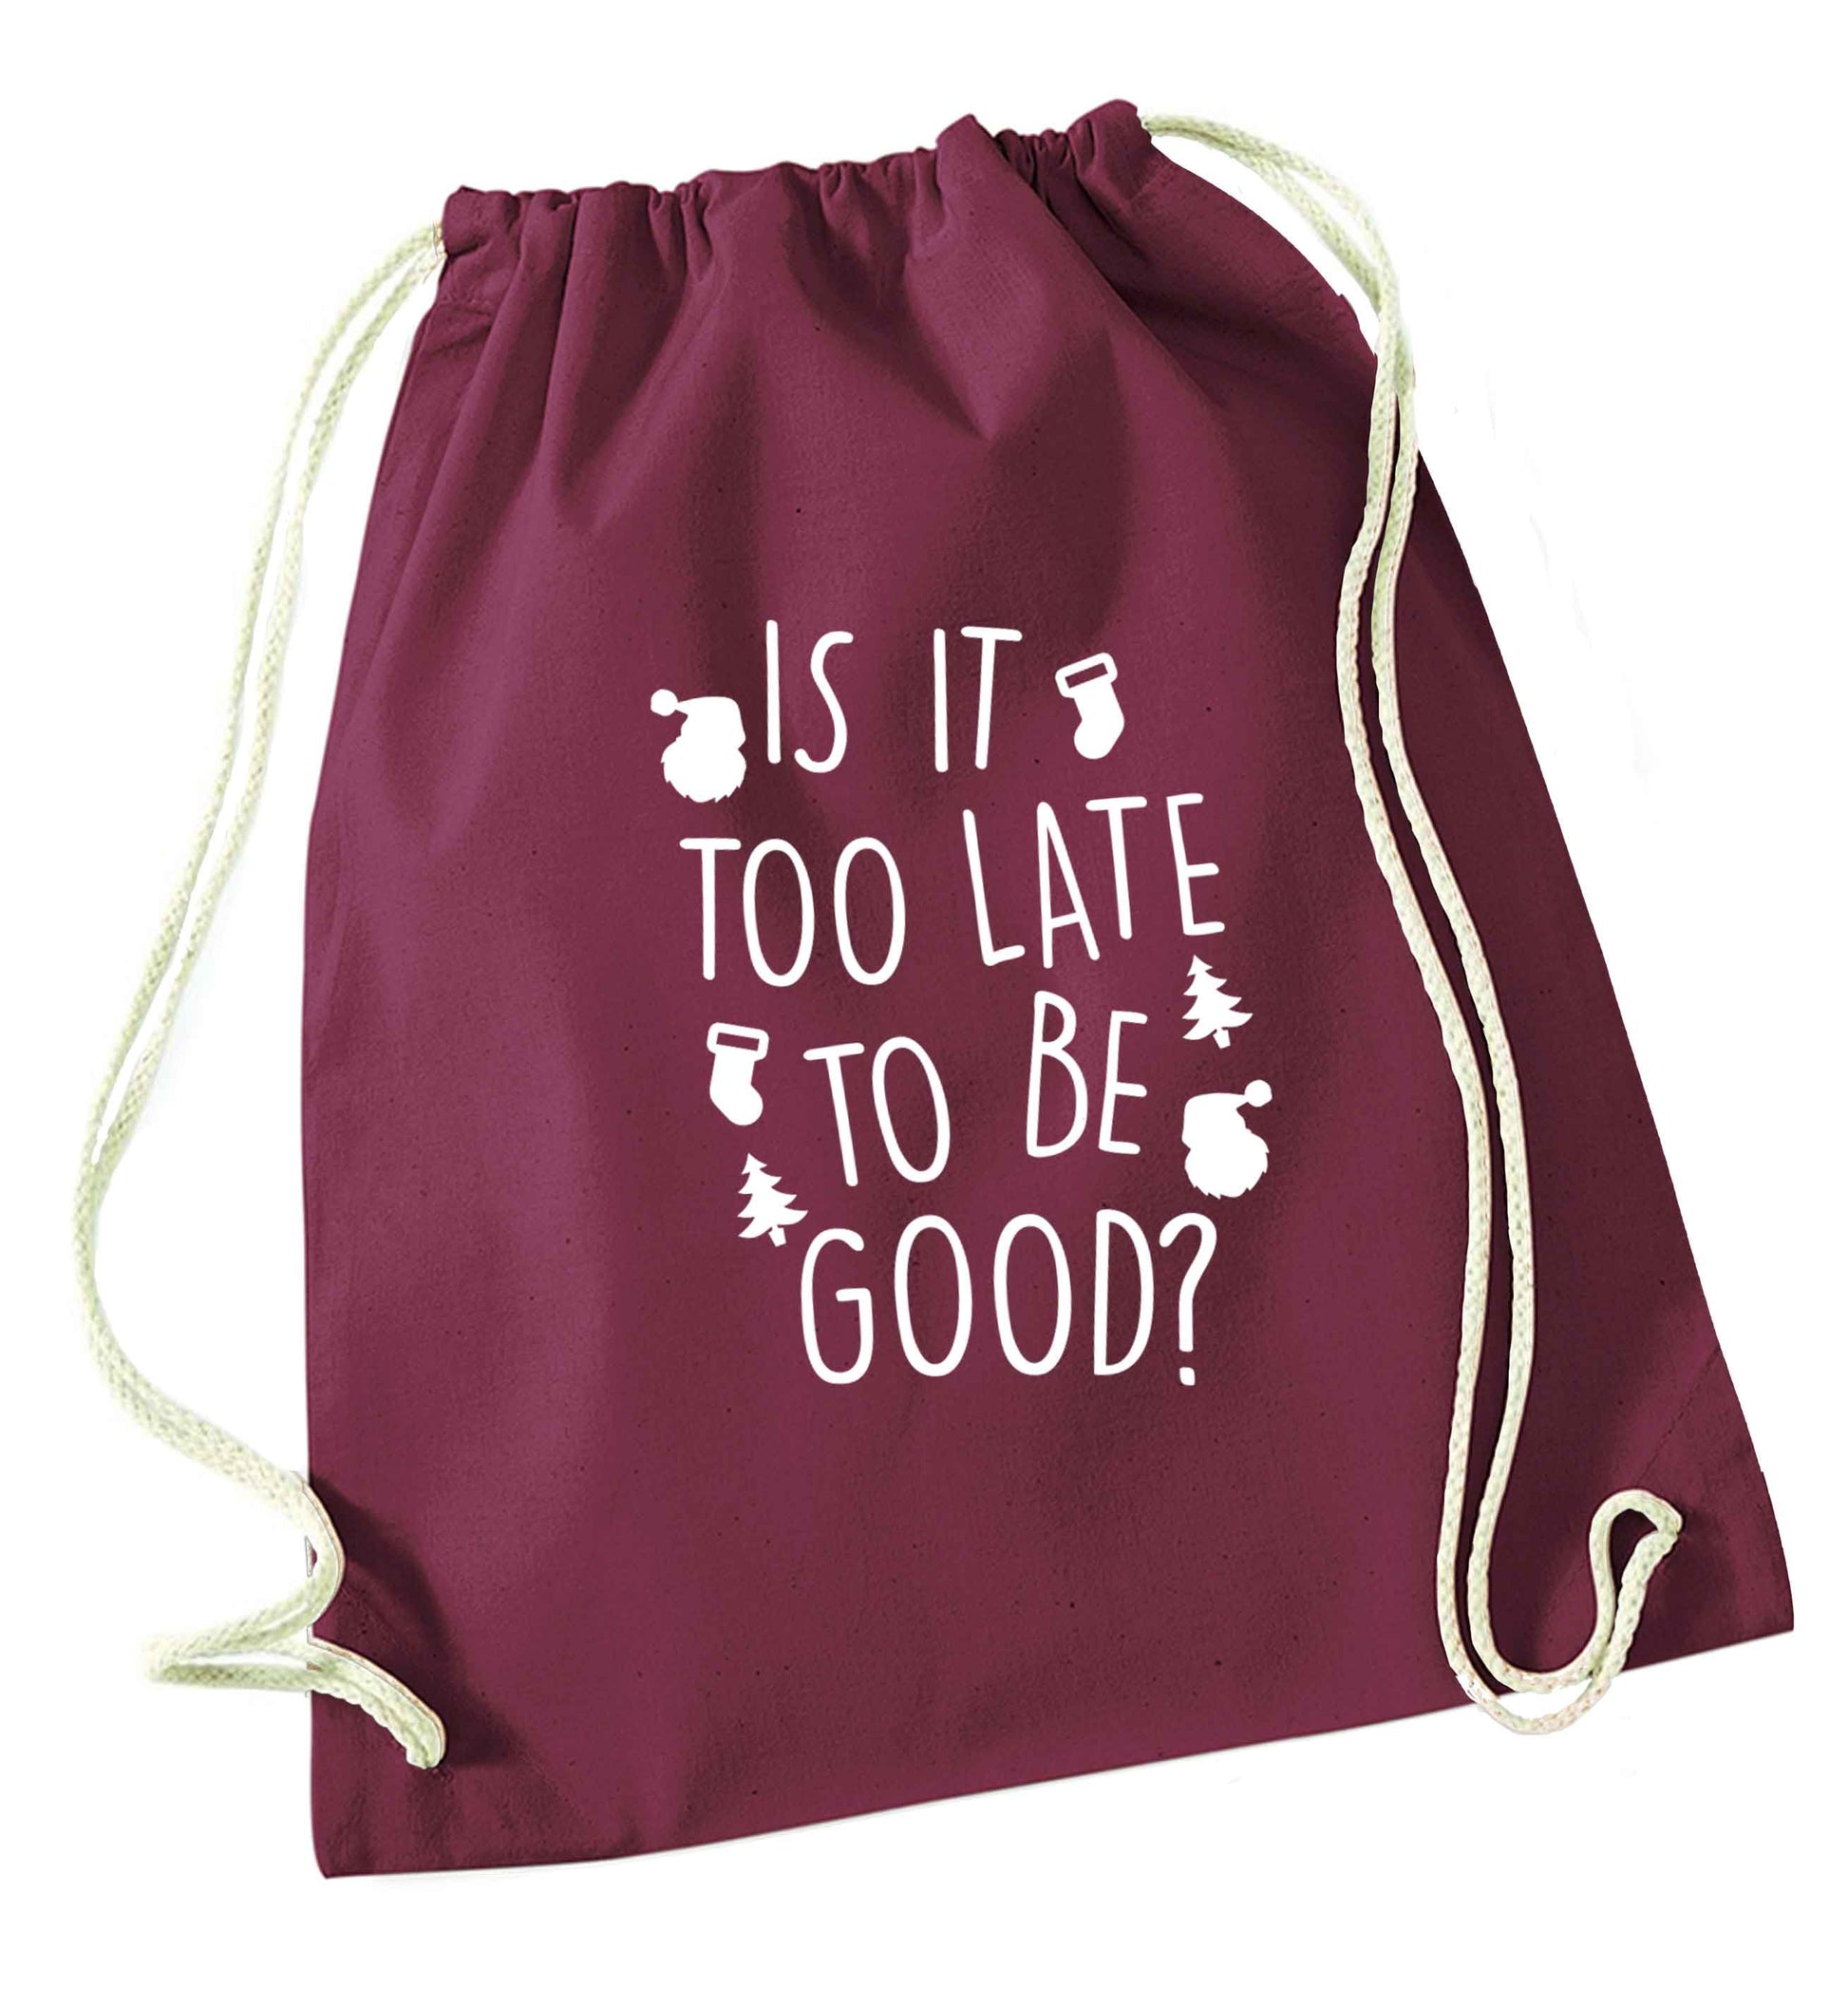 Too Late to be Good maroon drawstring bag